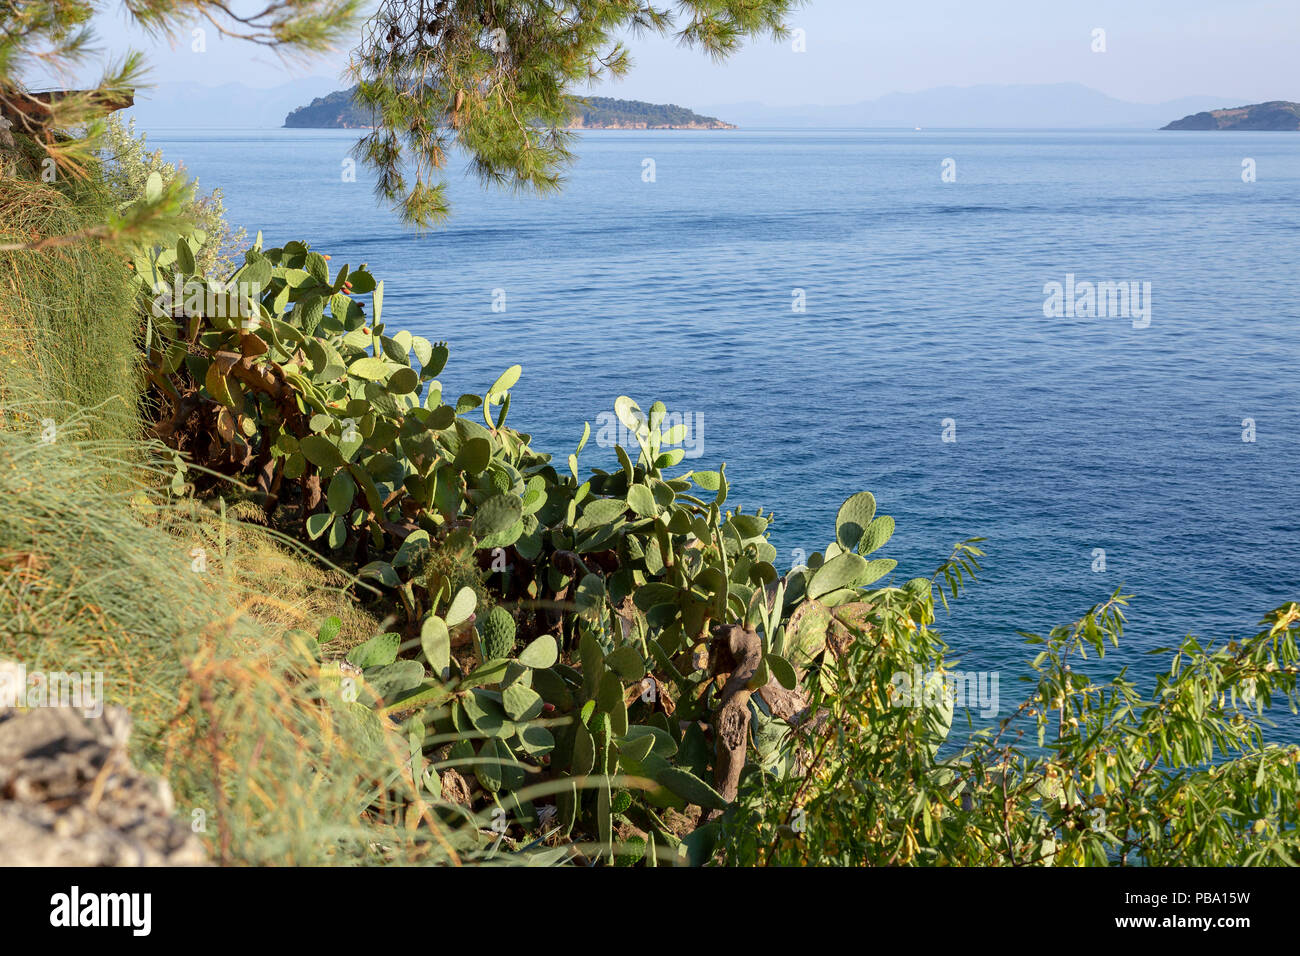 View of Aegean sea bay with grass and cactuses on foreground, Skiathos island, Greece Stock Photo